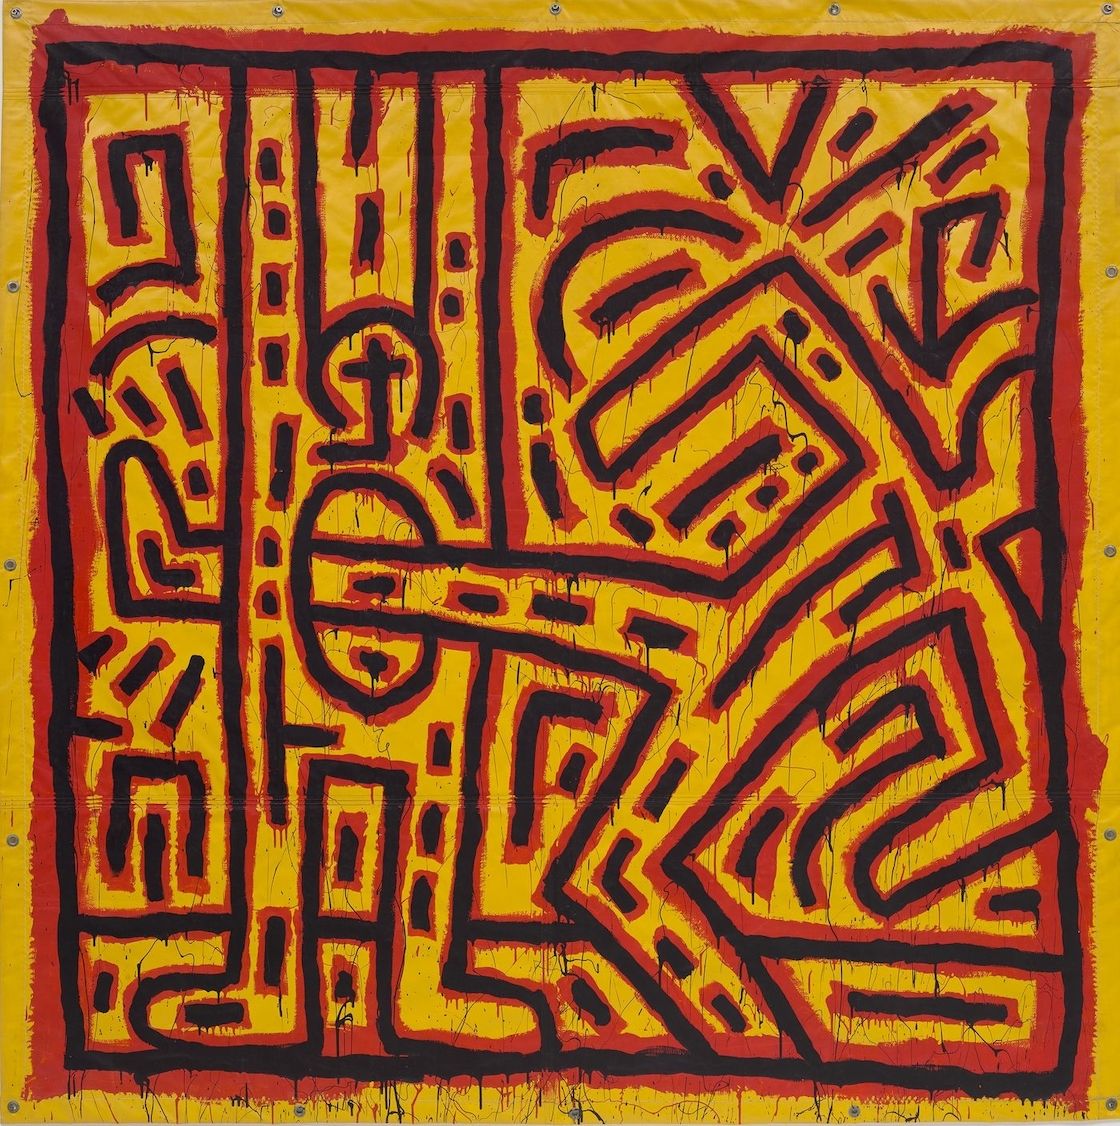 This Keith Haring masterpiece is going to auction for the first time